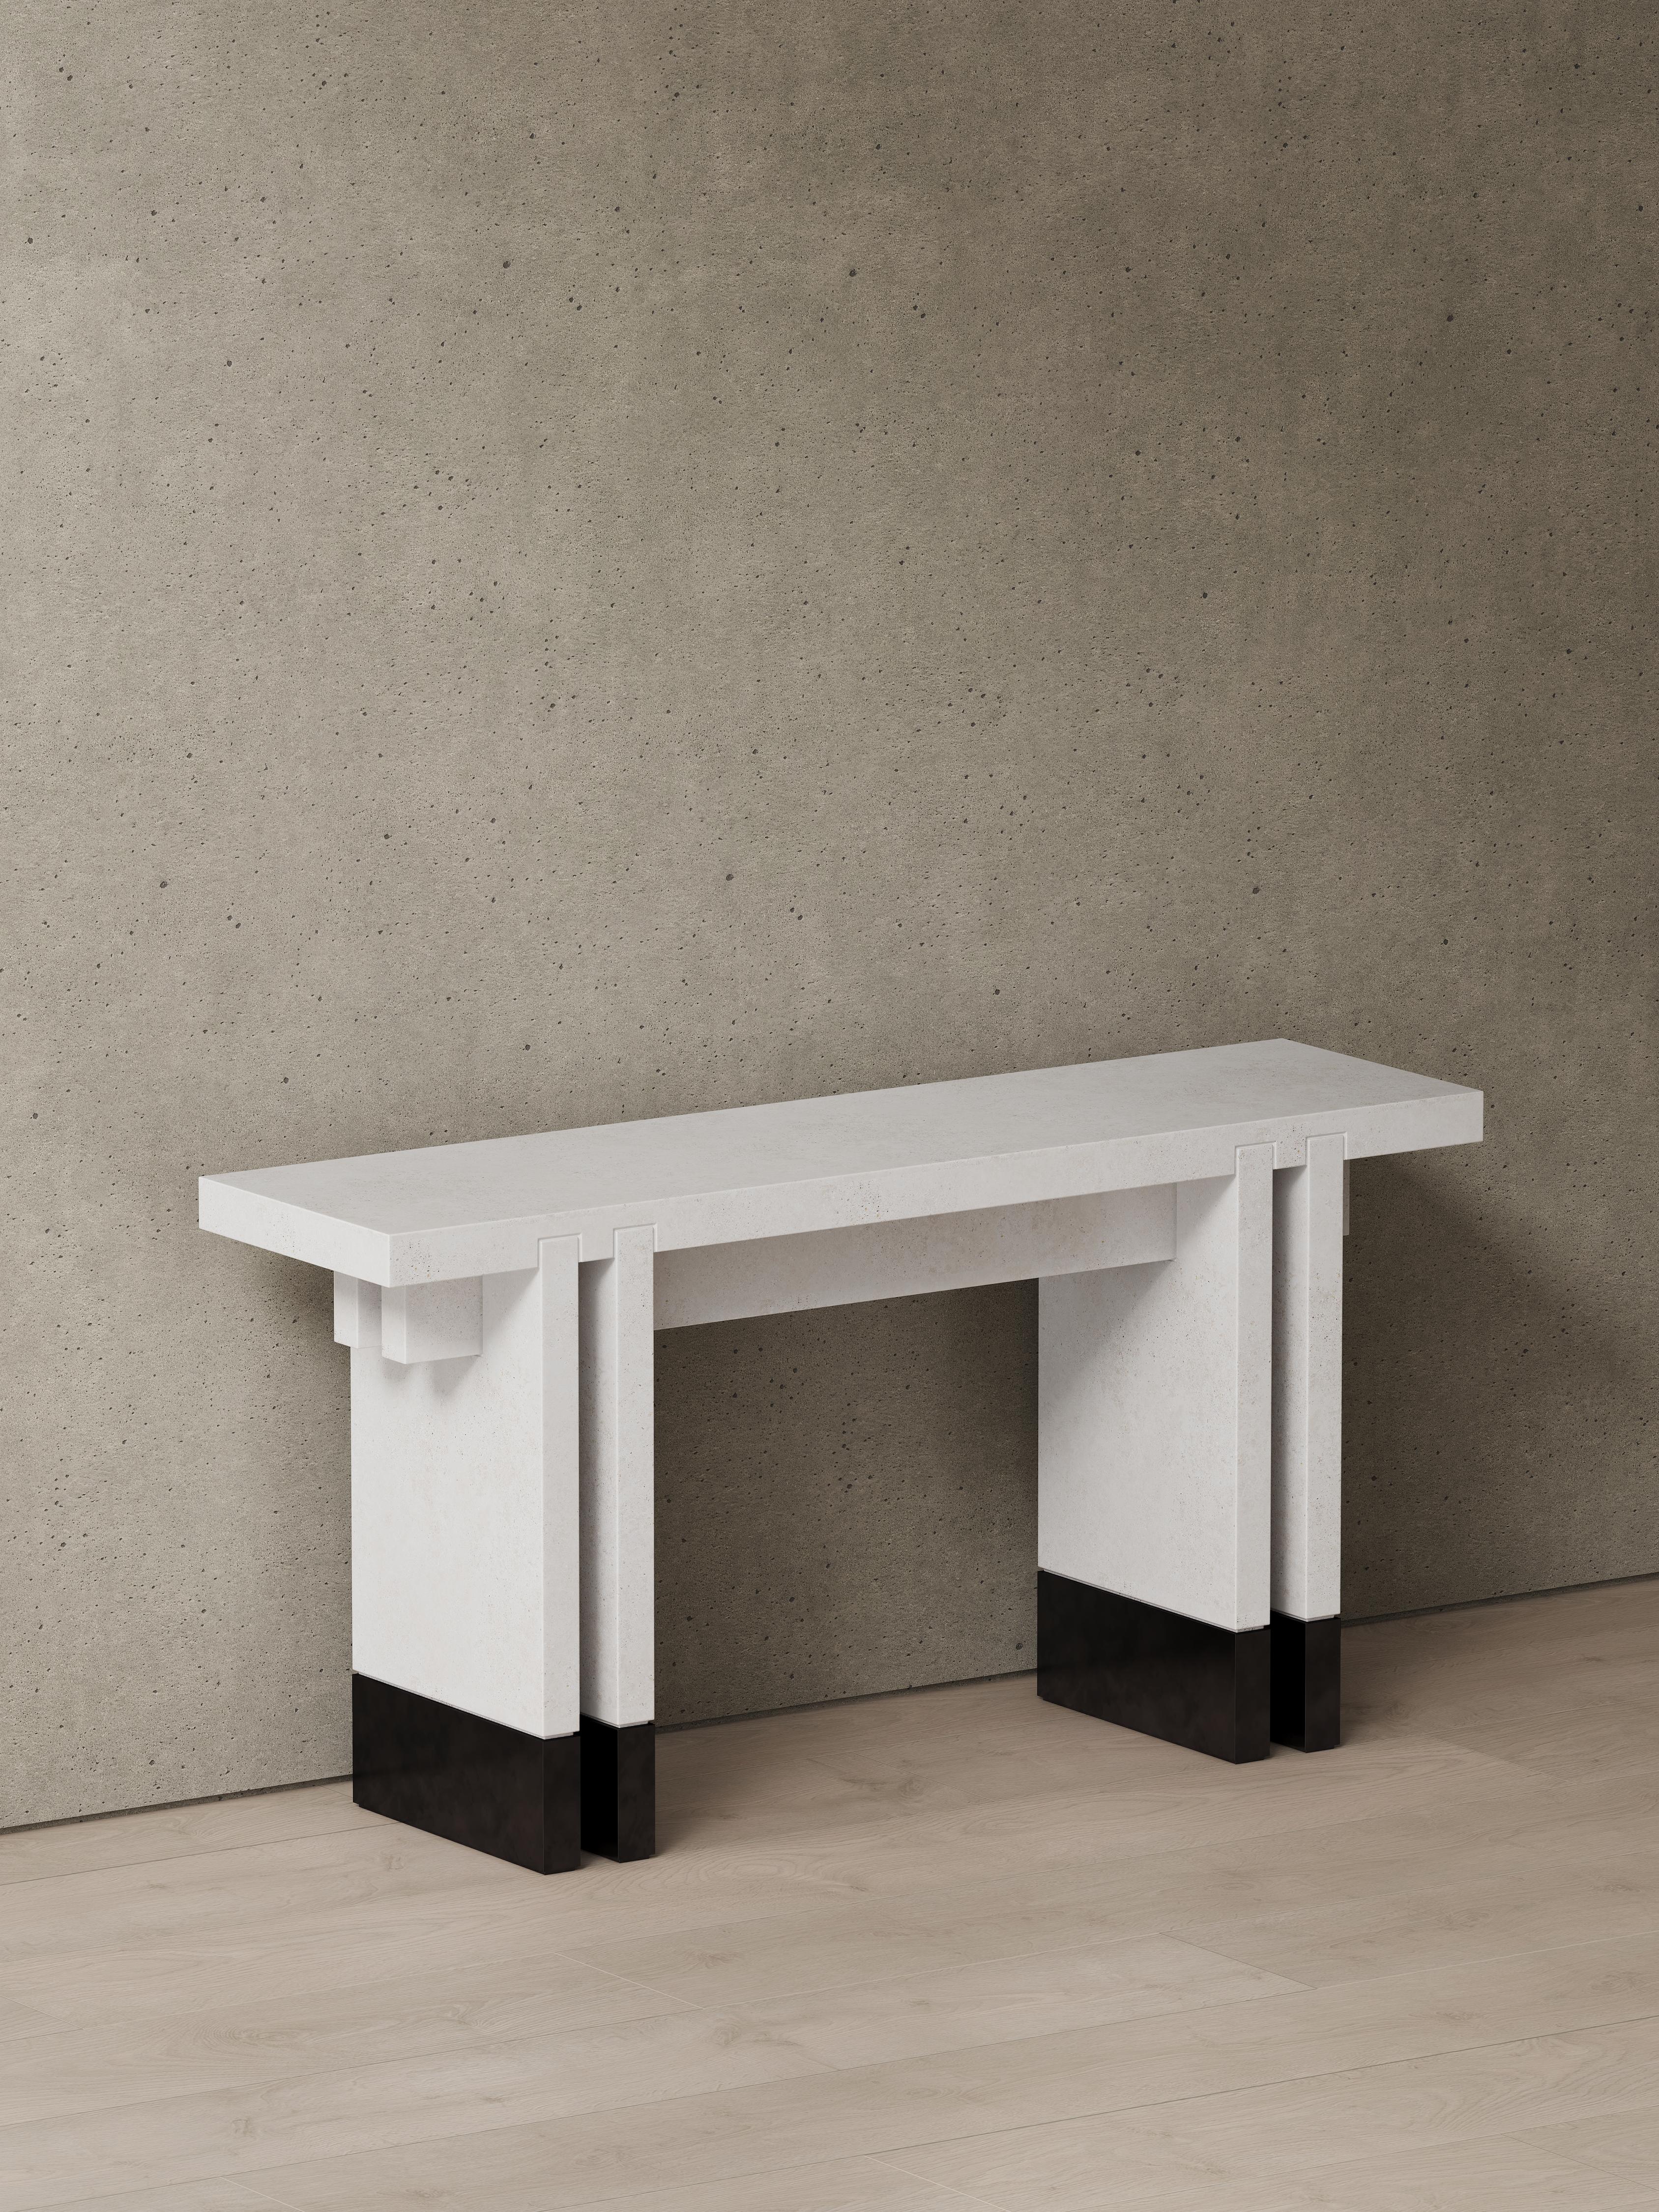 Drawing inspiration from Japanese minimalism, the Intersekt collection elevates its design with a harmonious blend of symmetrical and linear features. Its foundational material, Capri Limestone sourced from Spanish origins, imbues a light shade that